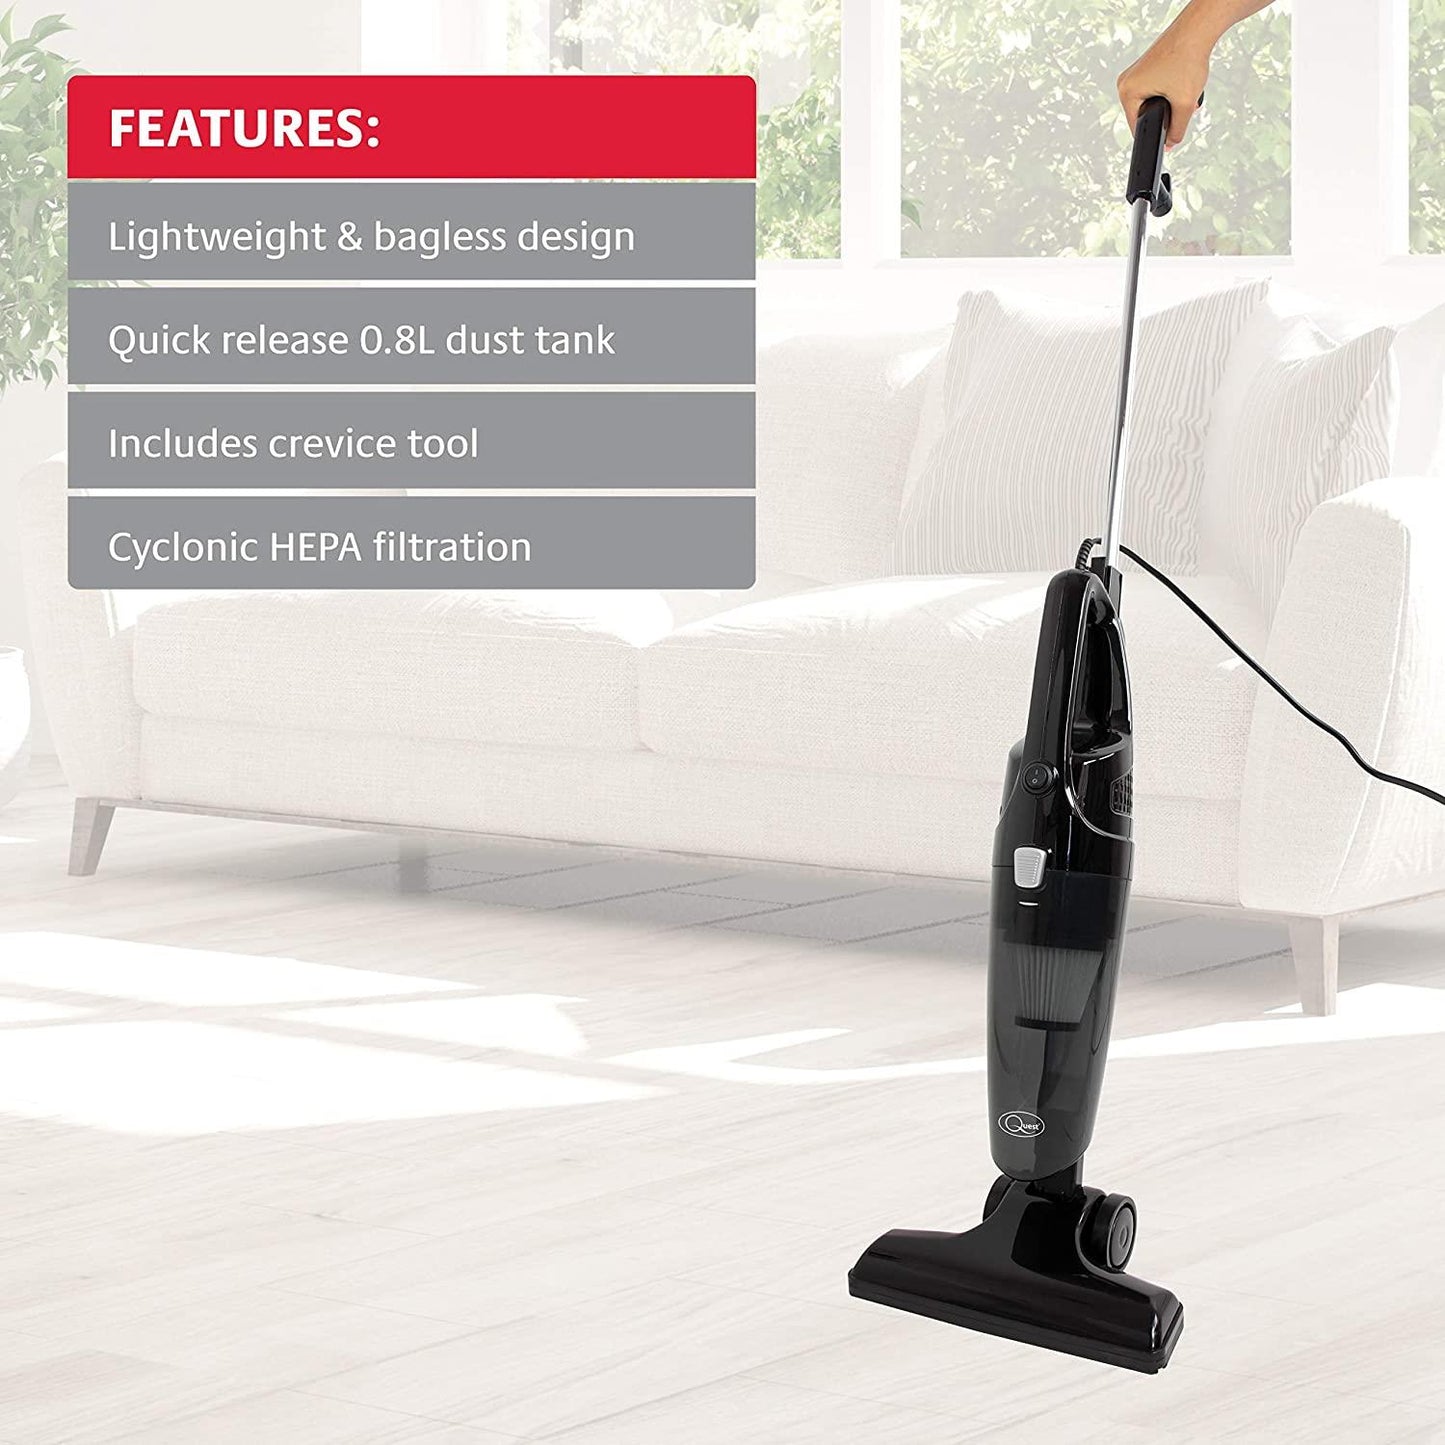 Quest 2-in-1 Upright and Handheld Lightweight Bagless Vacuum Cleaner Black, 600 W- 44839